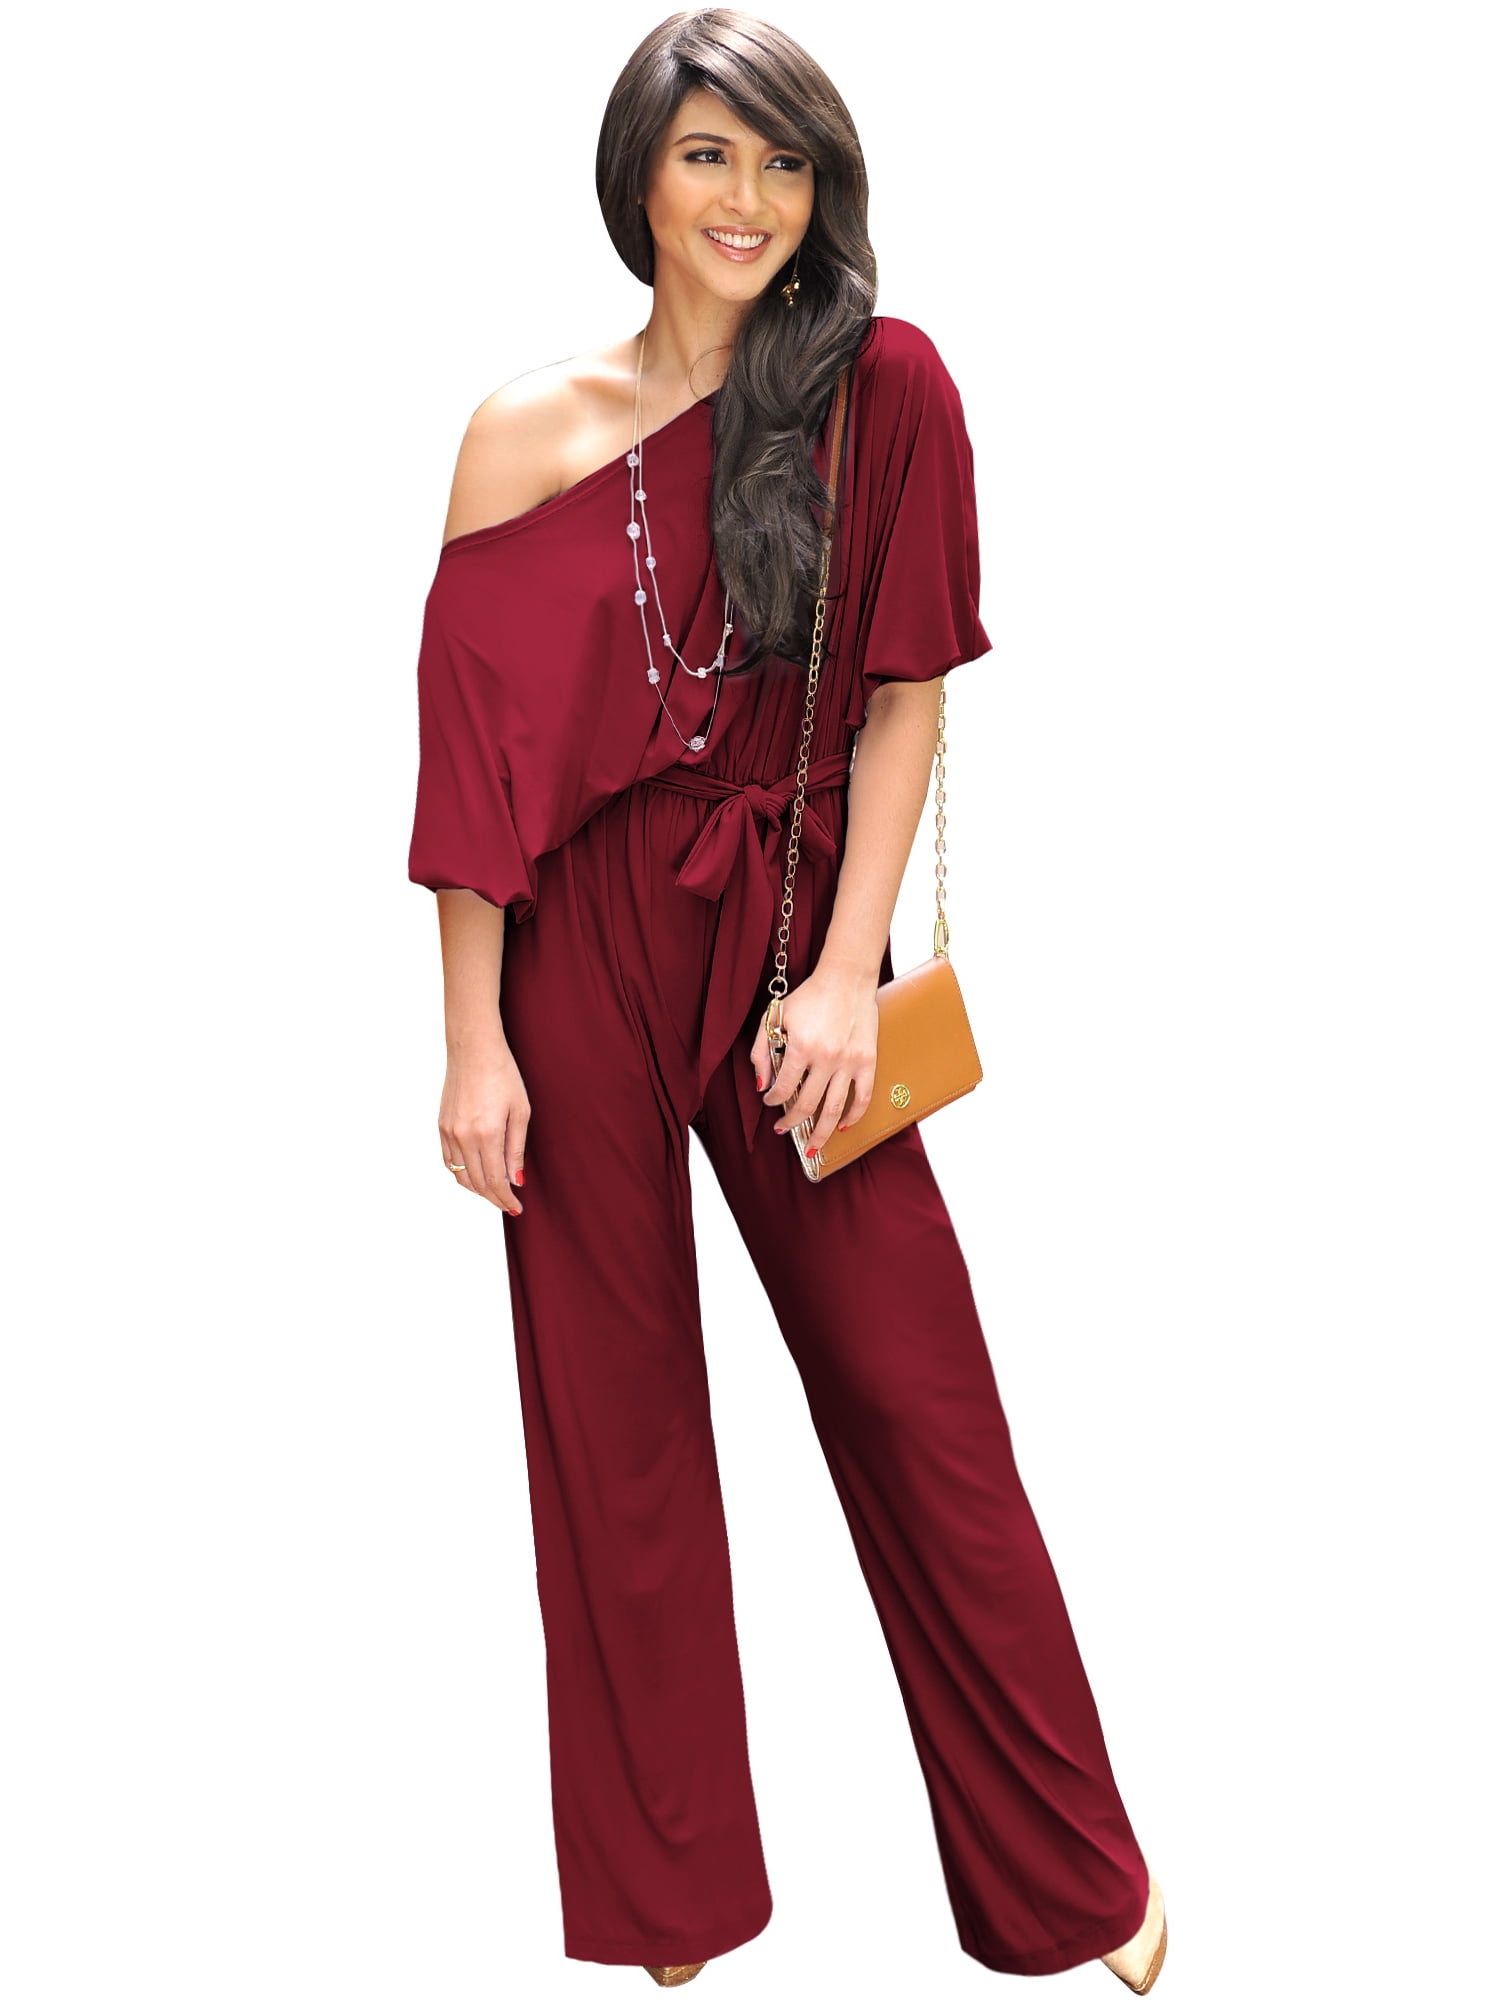 Big And Tall Plus Size S-5XL Transser Womens Summer Casual Cotton Linen Plain Long Rompers Jumpsuit V Neck Sleeveless Button Pantsuit with Pockets 